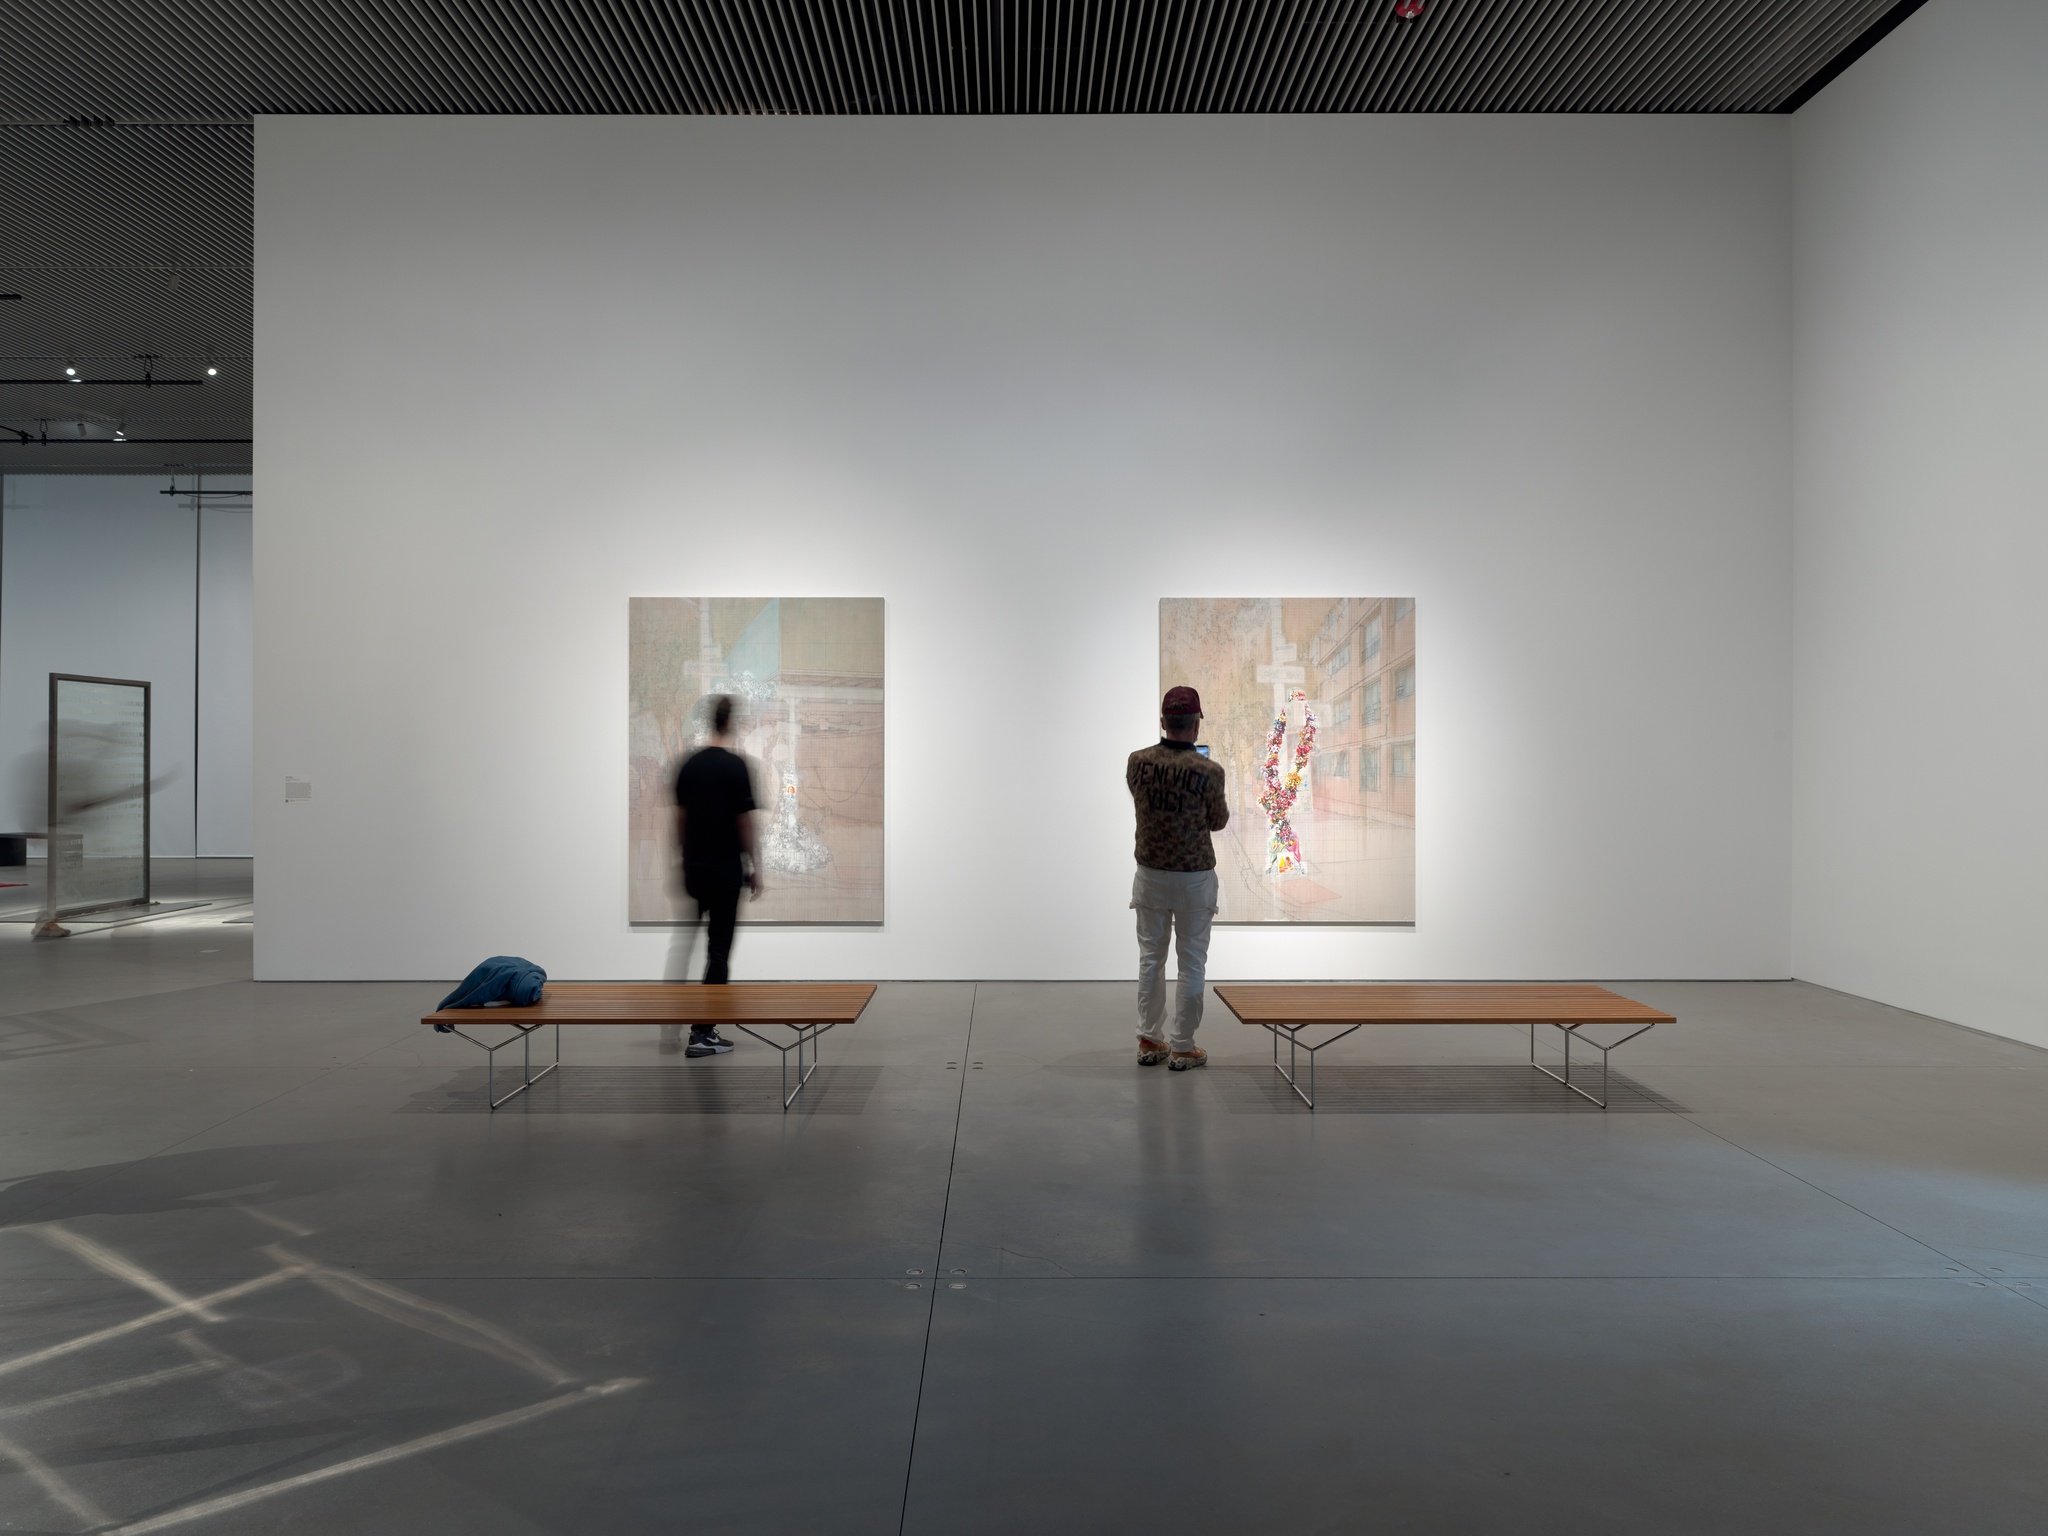 An art gallery with two people standing in front of two large paintings hanging on a white wall